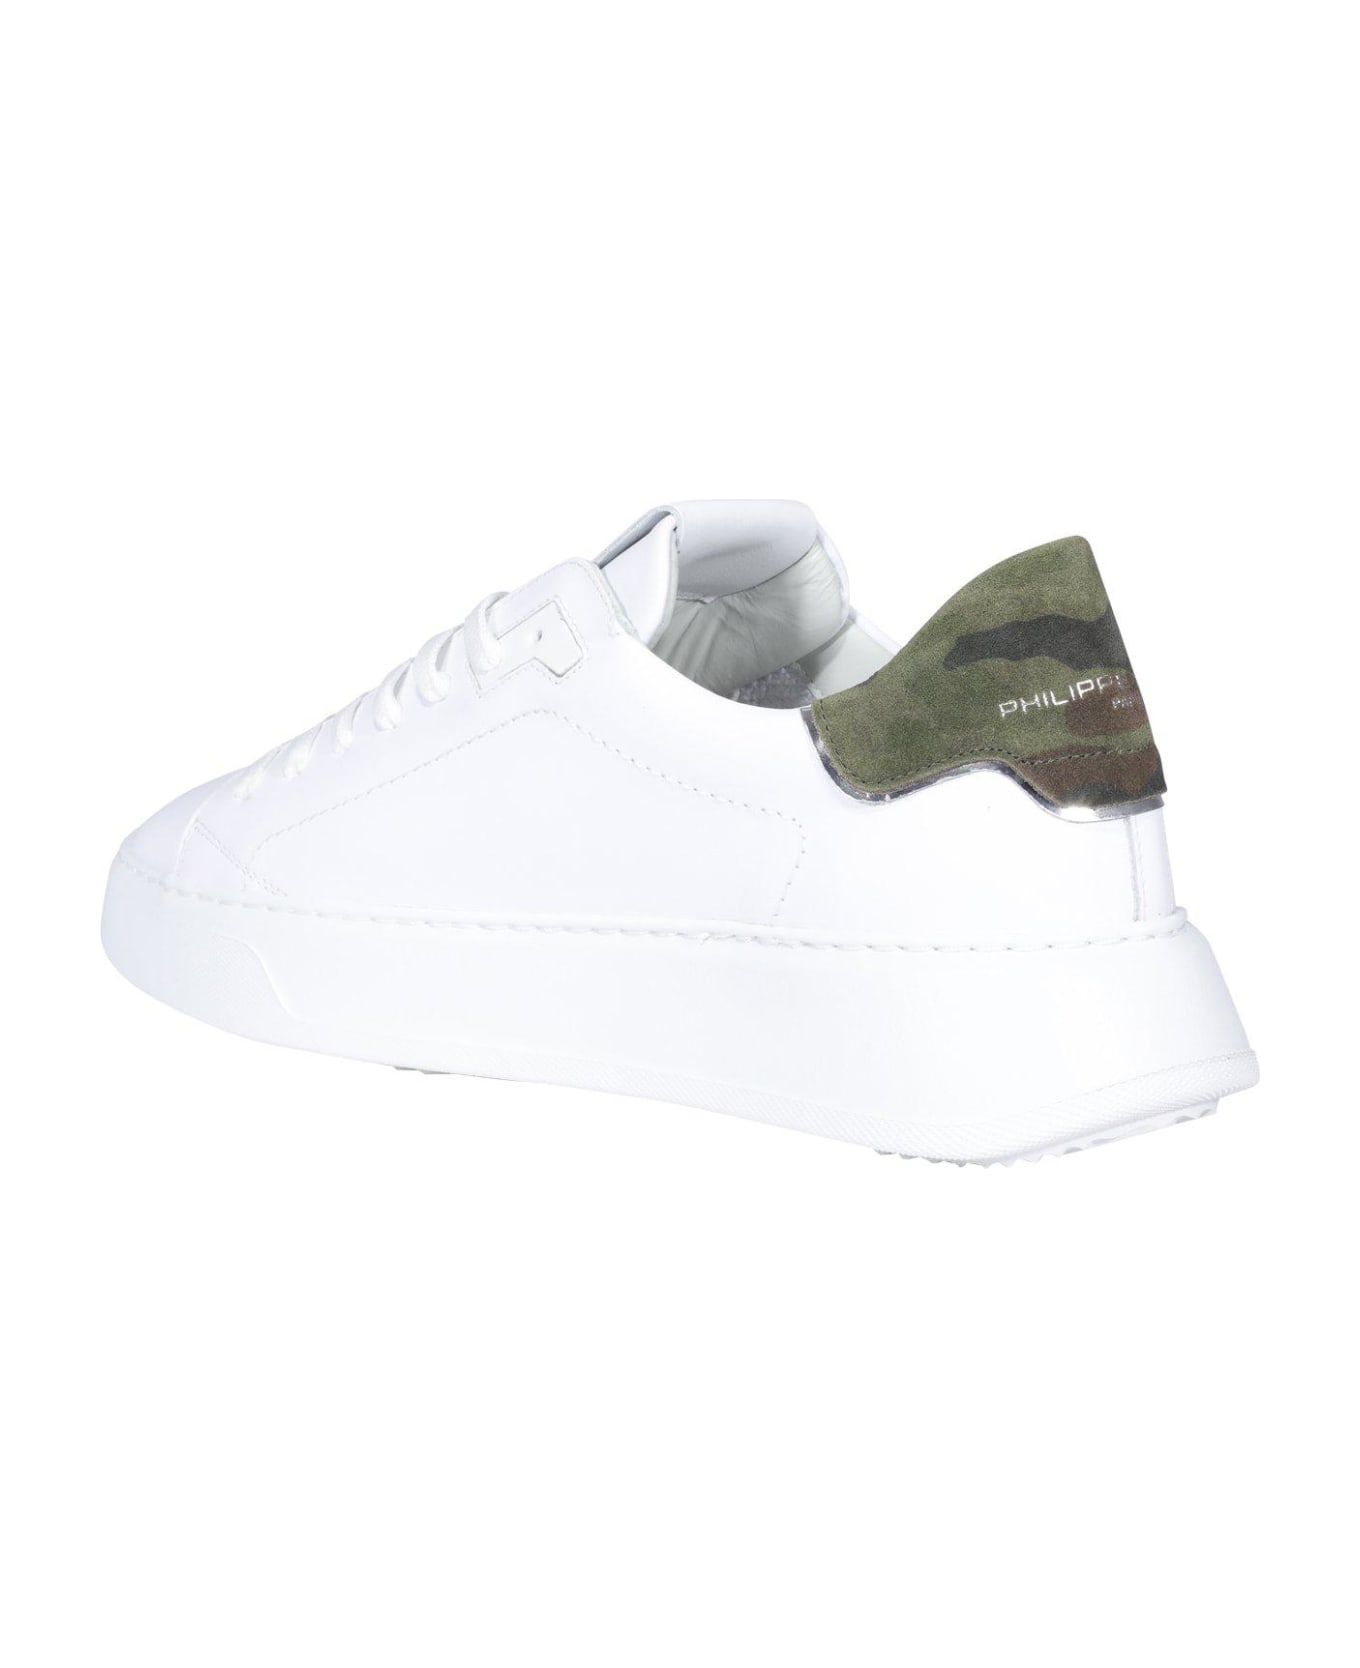 Philippe Model Temple Veau Camouflage Sneakers - Bianco e Verde スニーカー